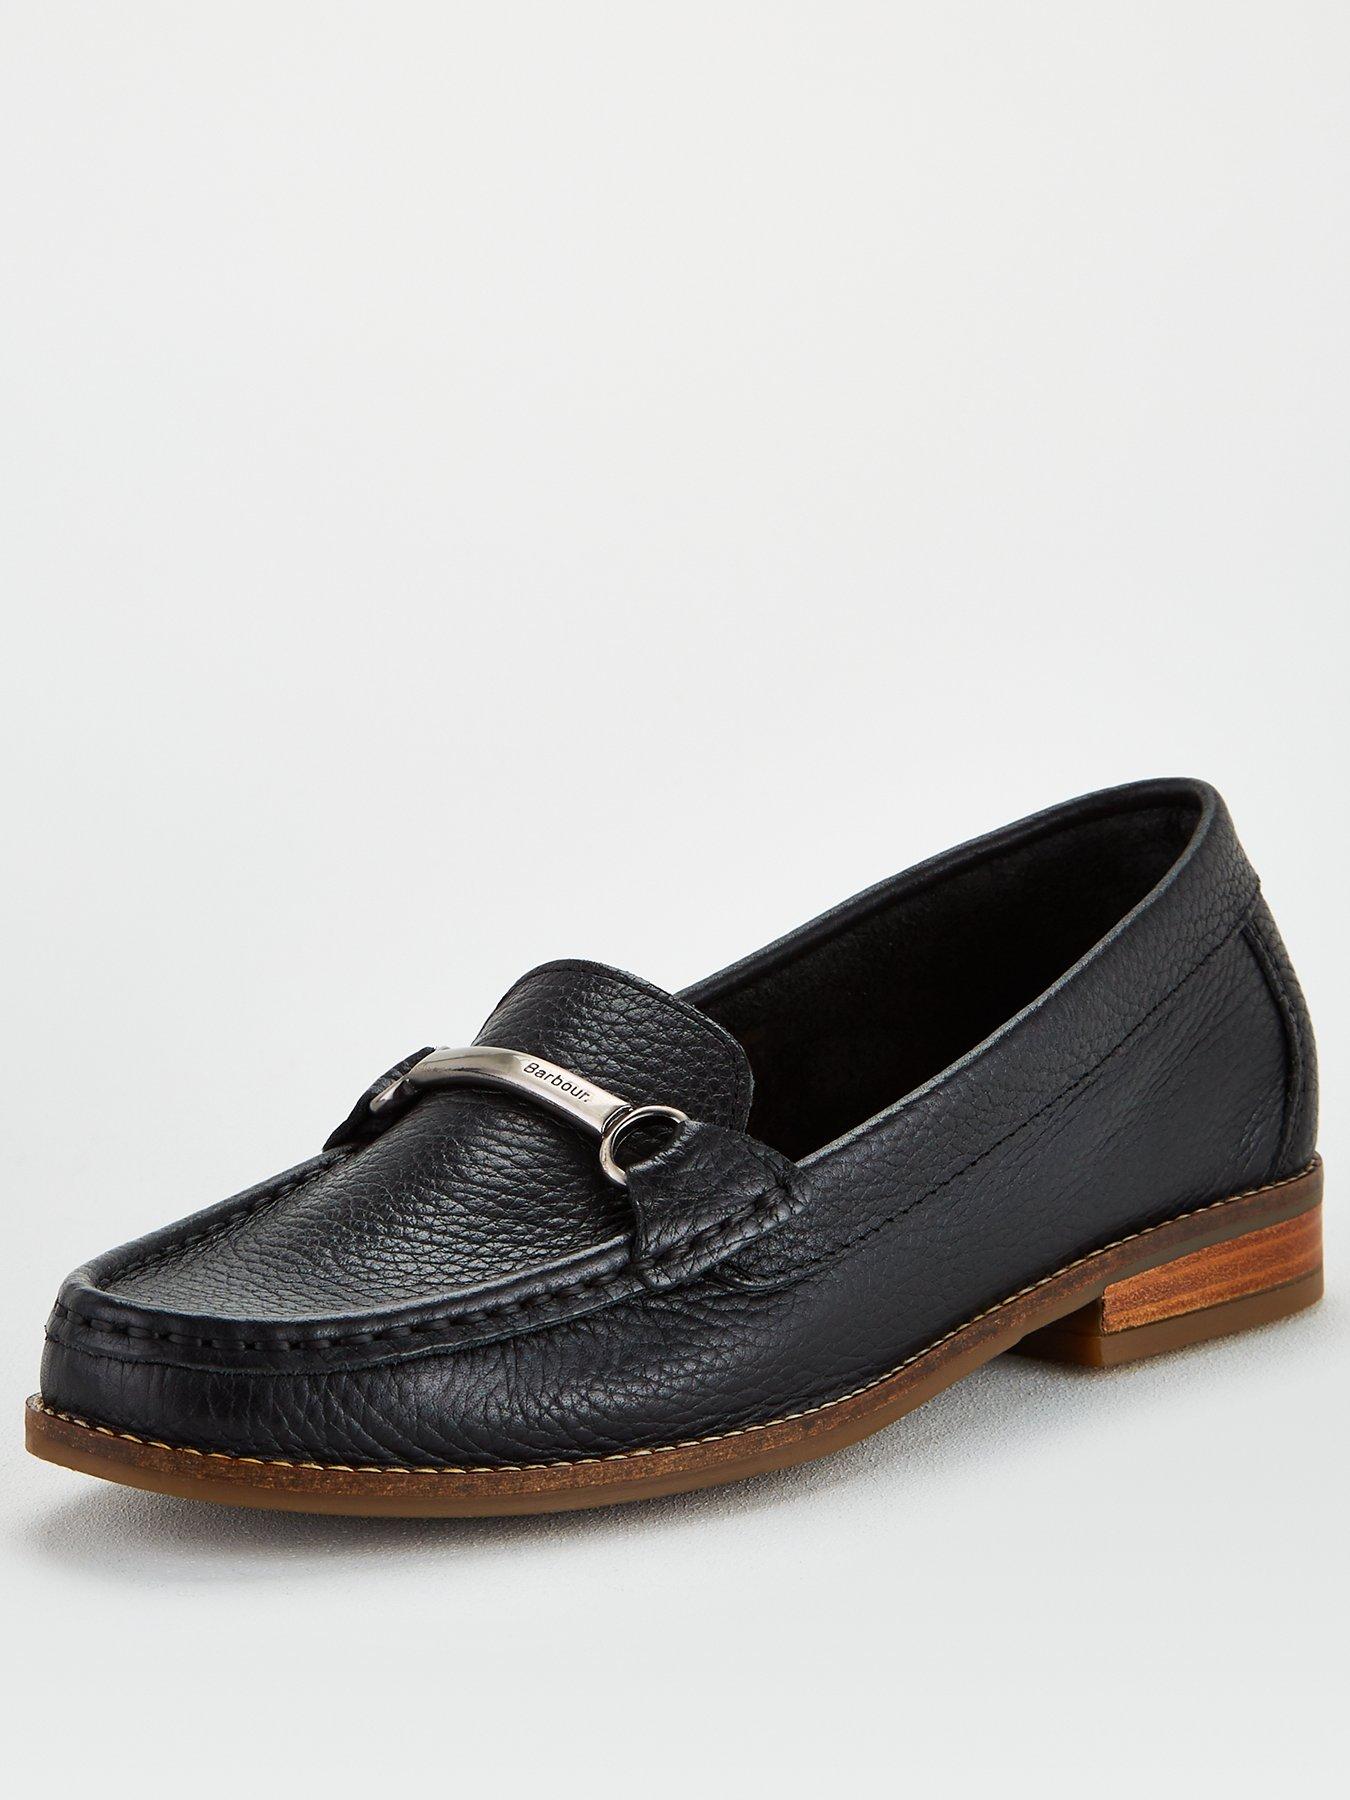 barbour loafers ladies